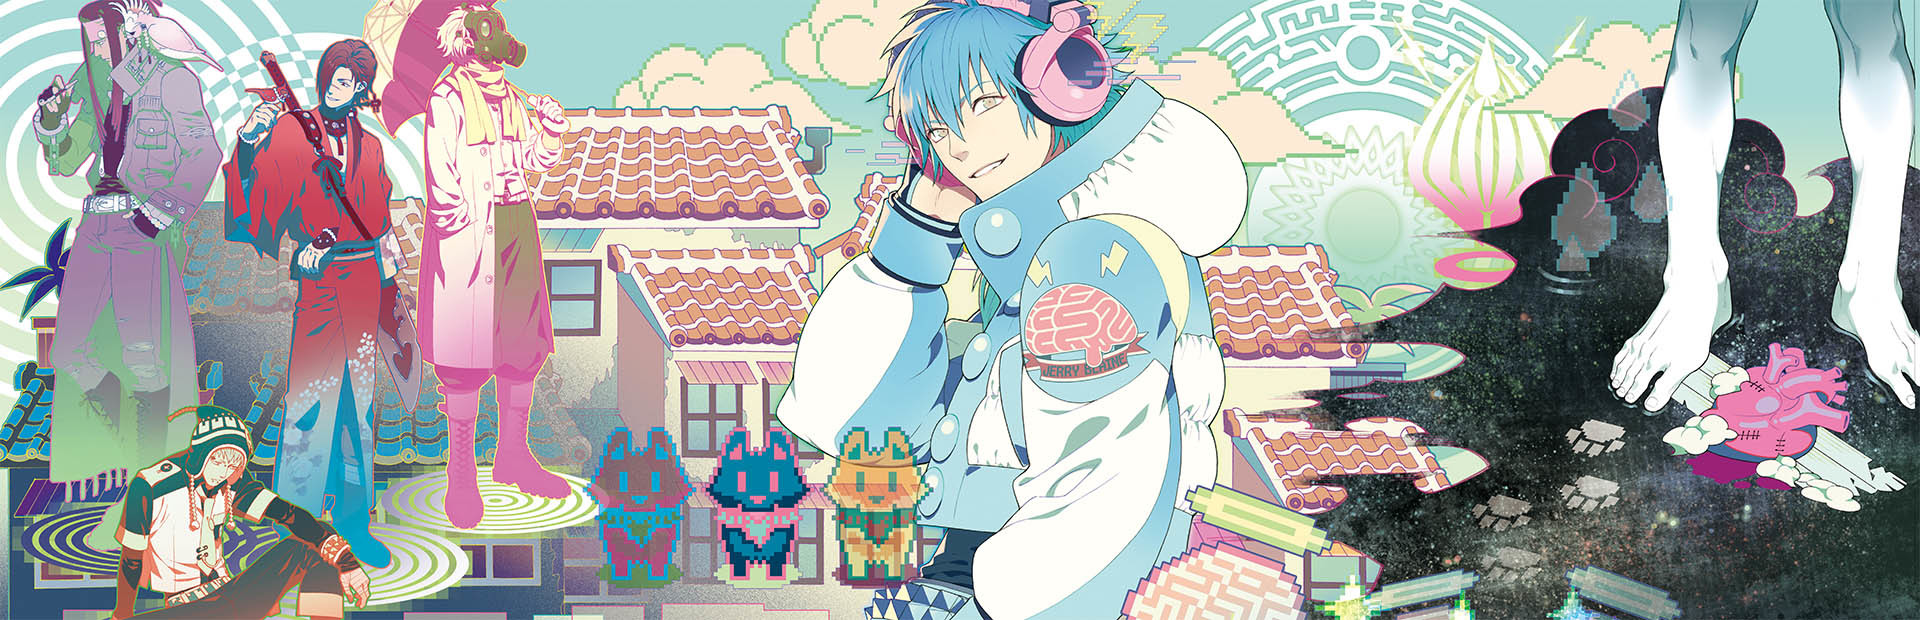 DRAMAtical Murder cover image